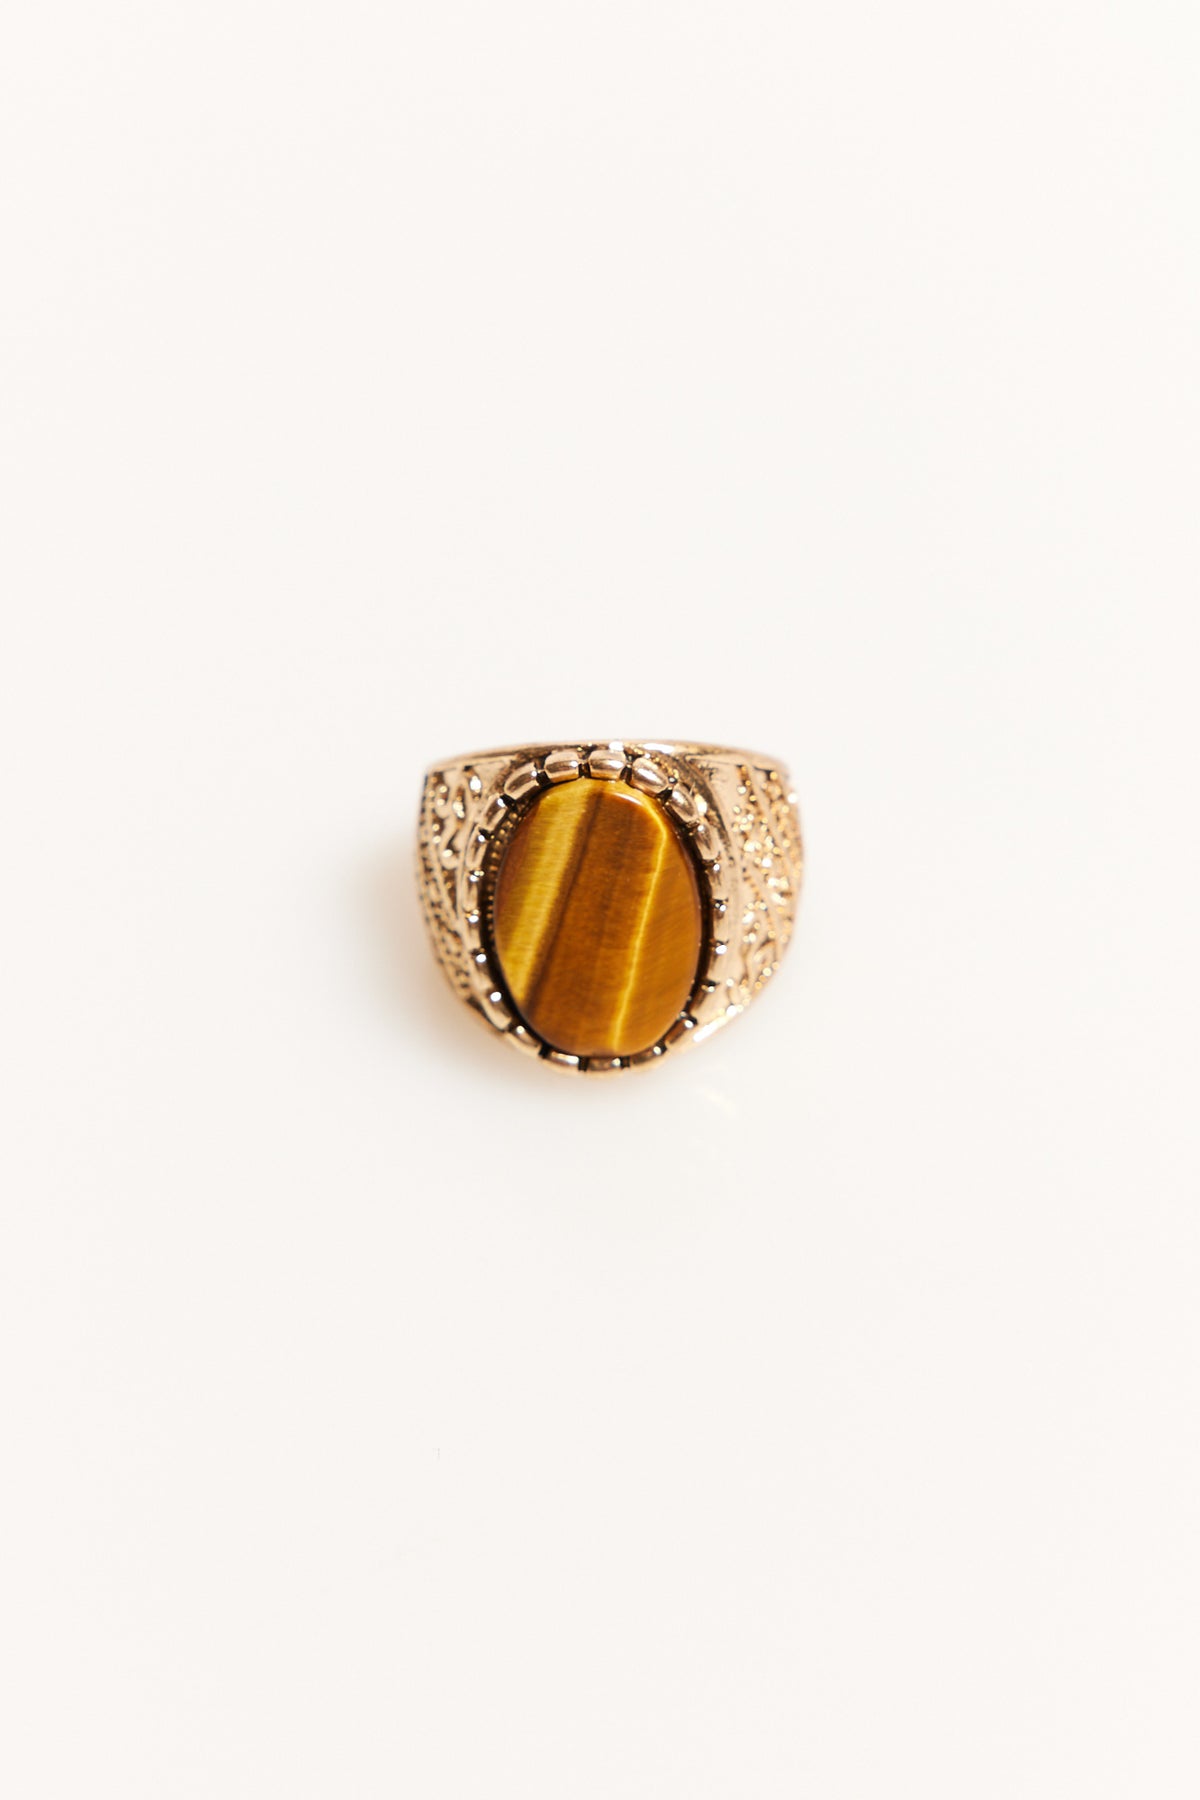 NTH Ring Antique Gold